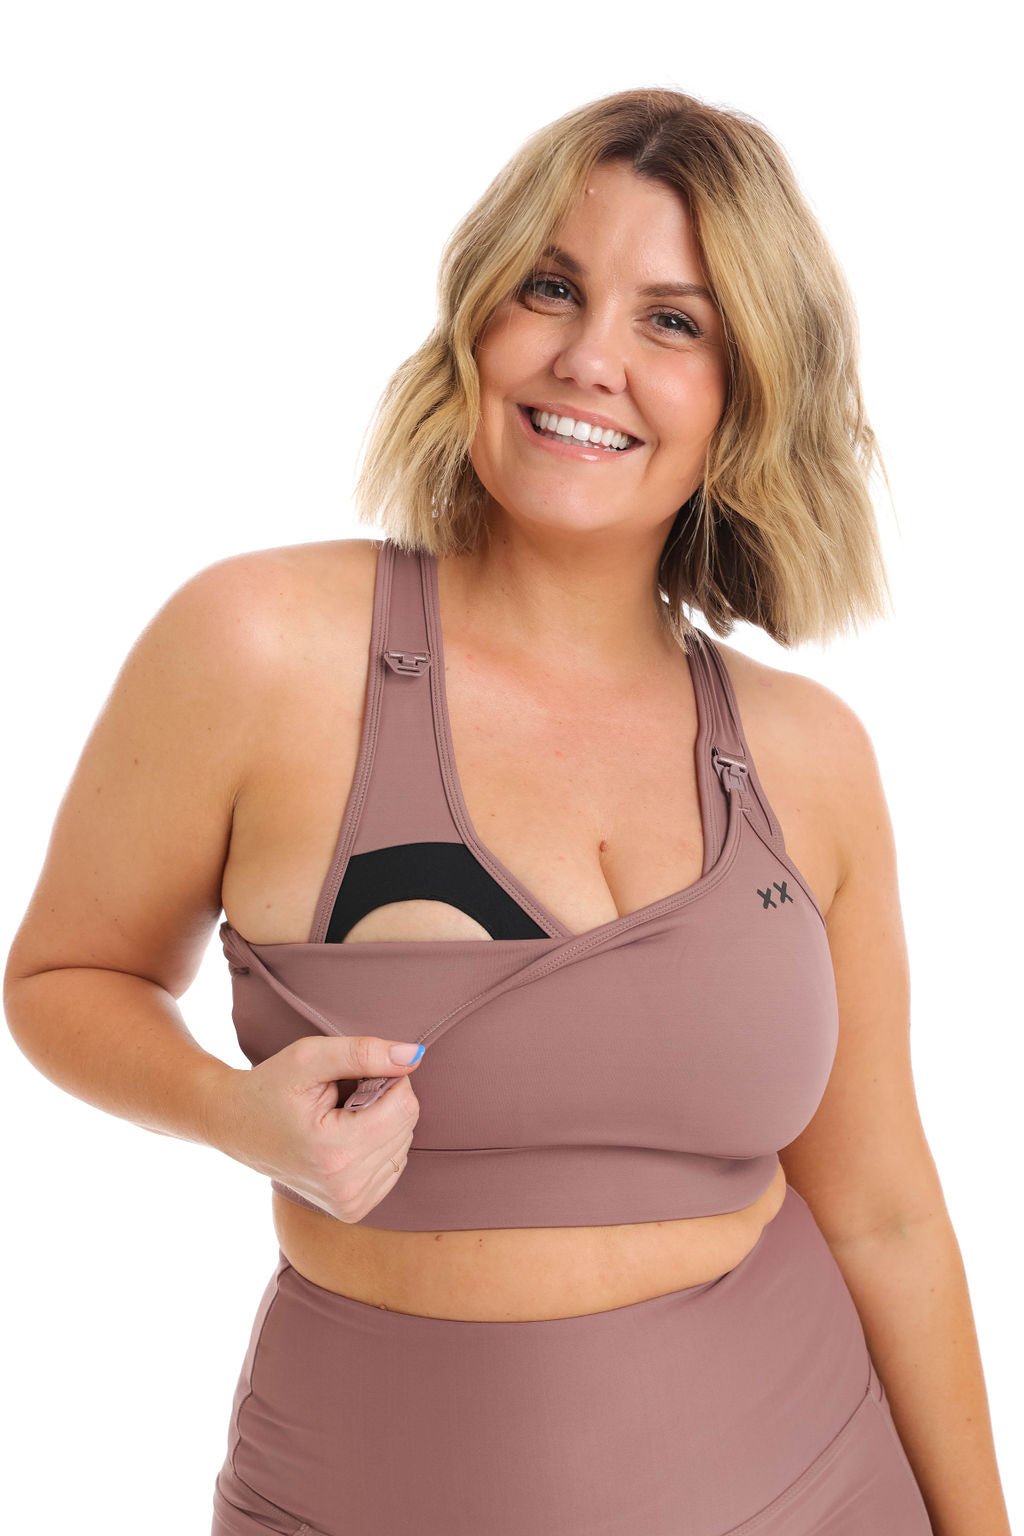 11 Places to Buy Plus-Size Nursing Bras That Fit Every Budget